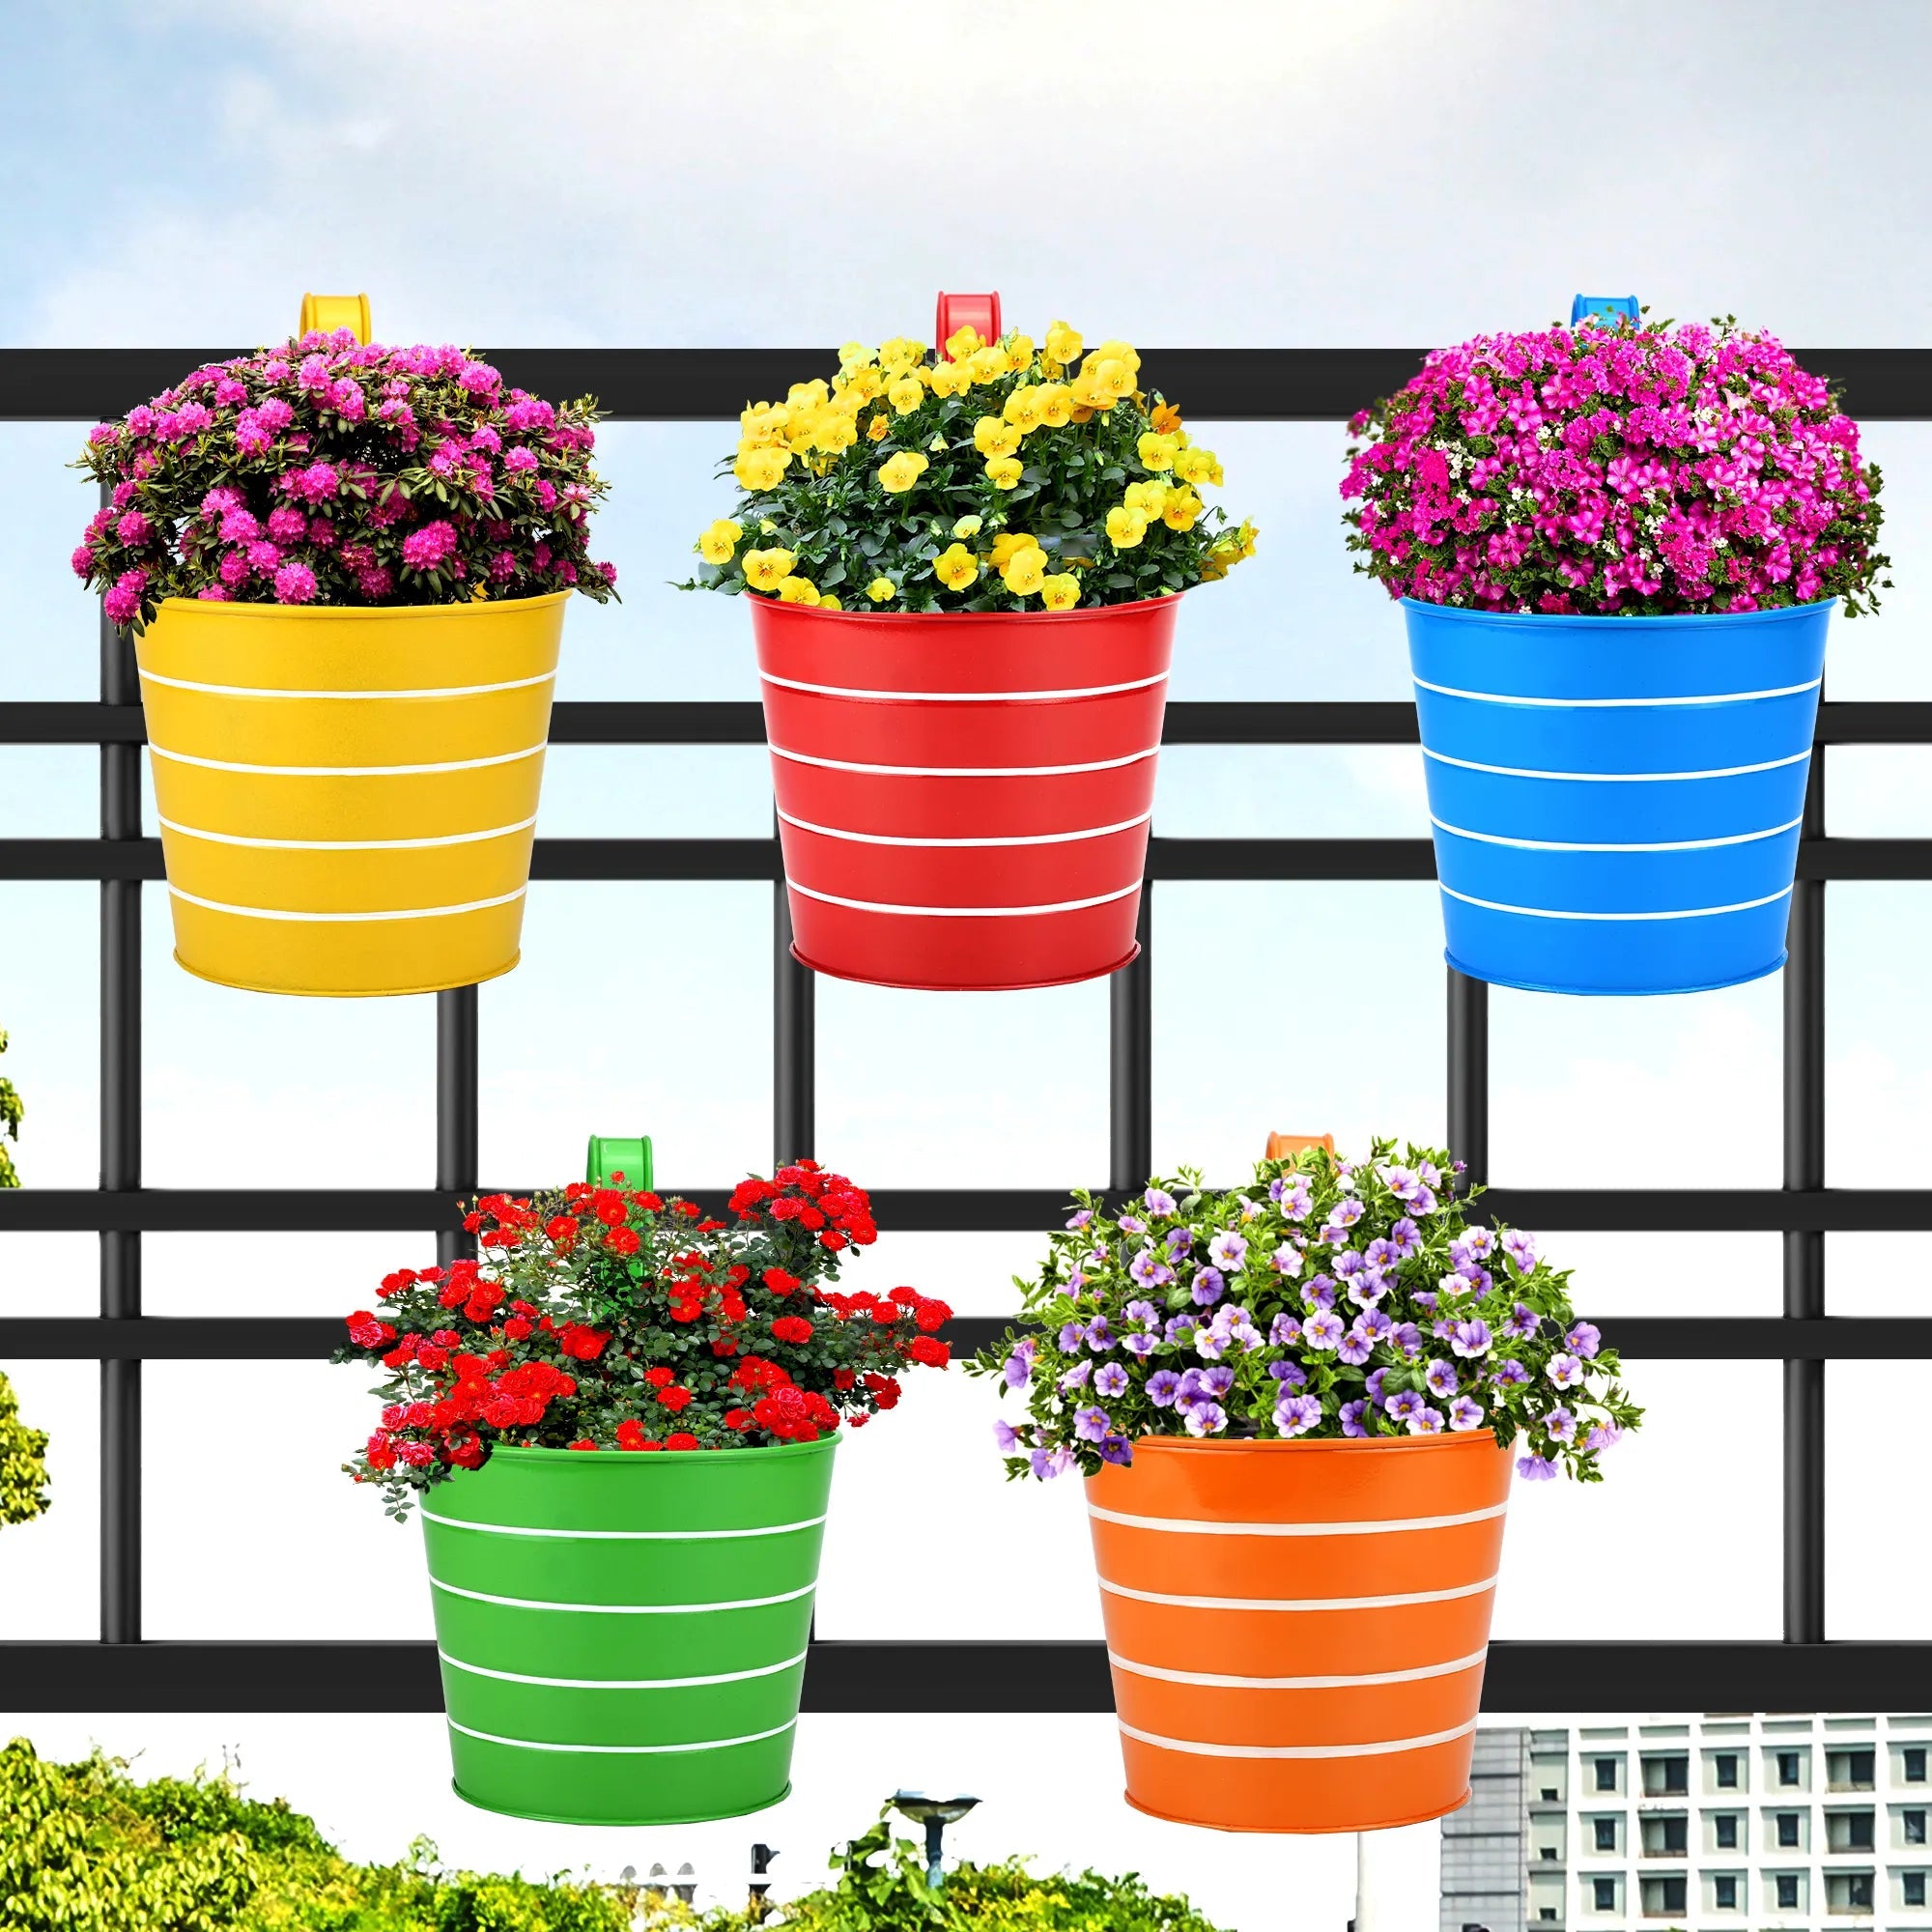 Colorful Round Shape Railing, Balcony Hanging Metal Planters (Multicolored) (Set of 5) Urban Plant 